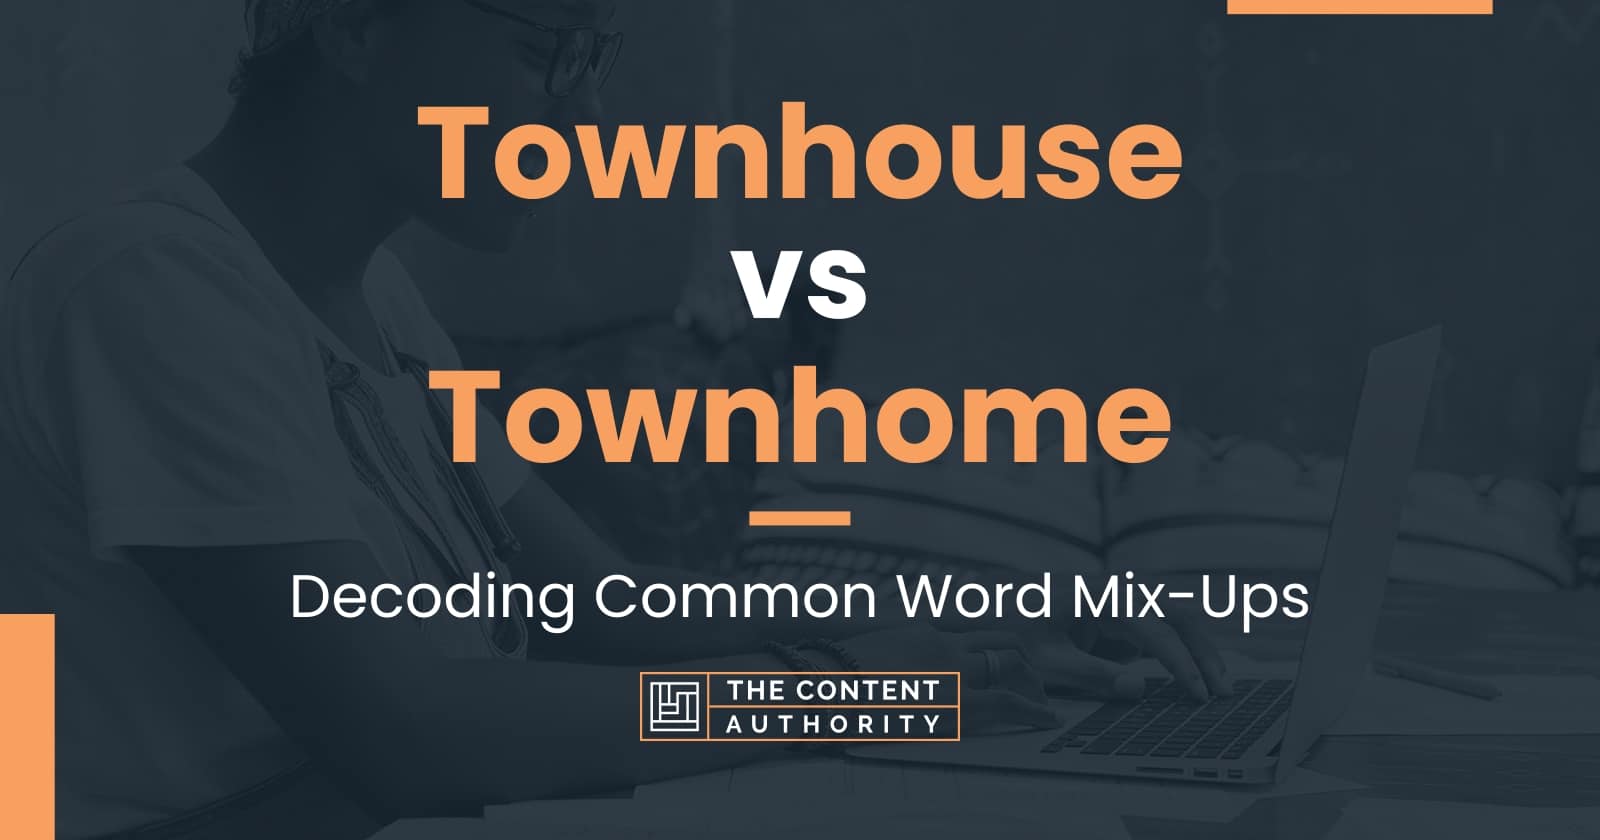 Townhouse vs Townhome: Decoding Common Word Mix-Ups